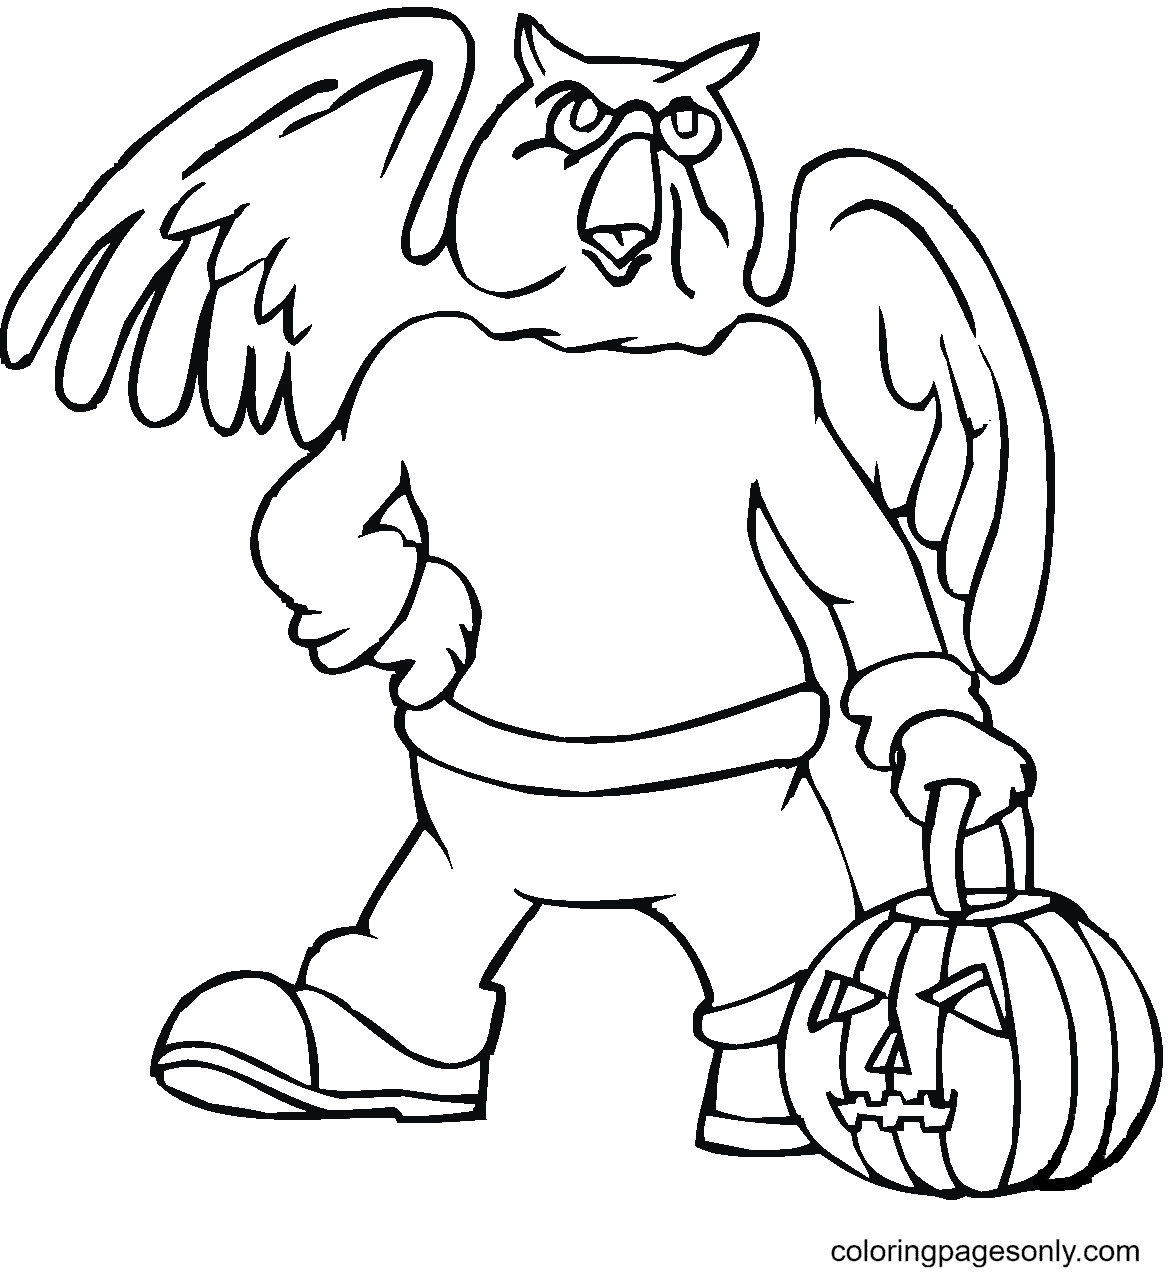 Owl with Pumkin Basket Coloring Pages